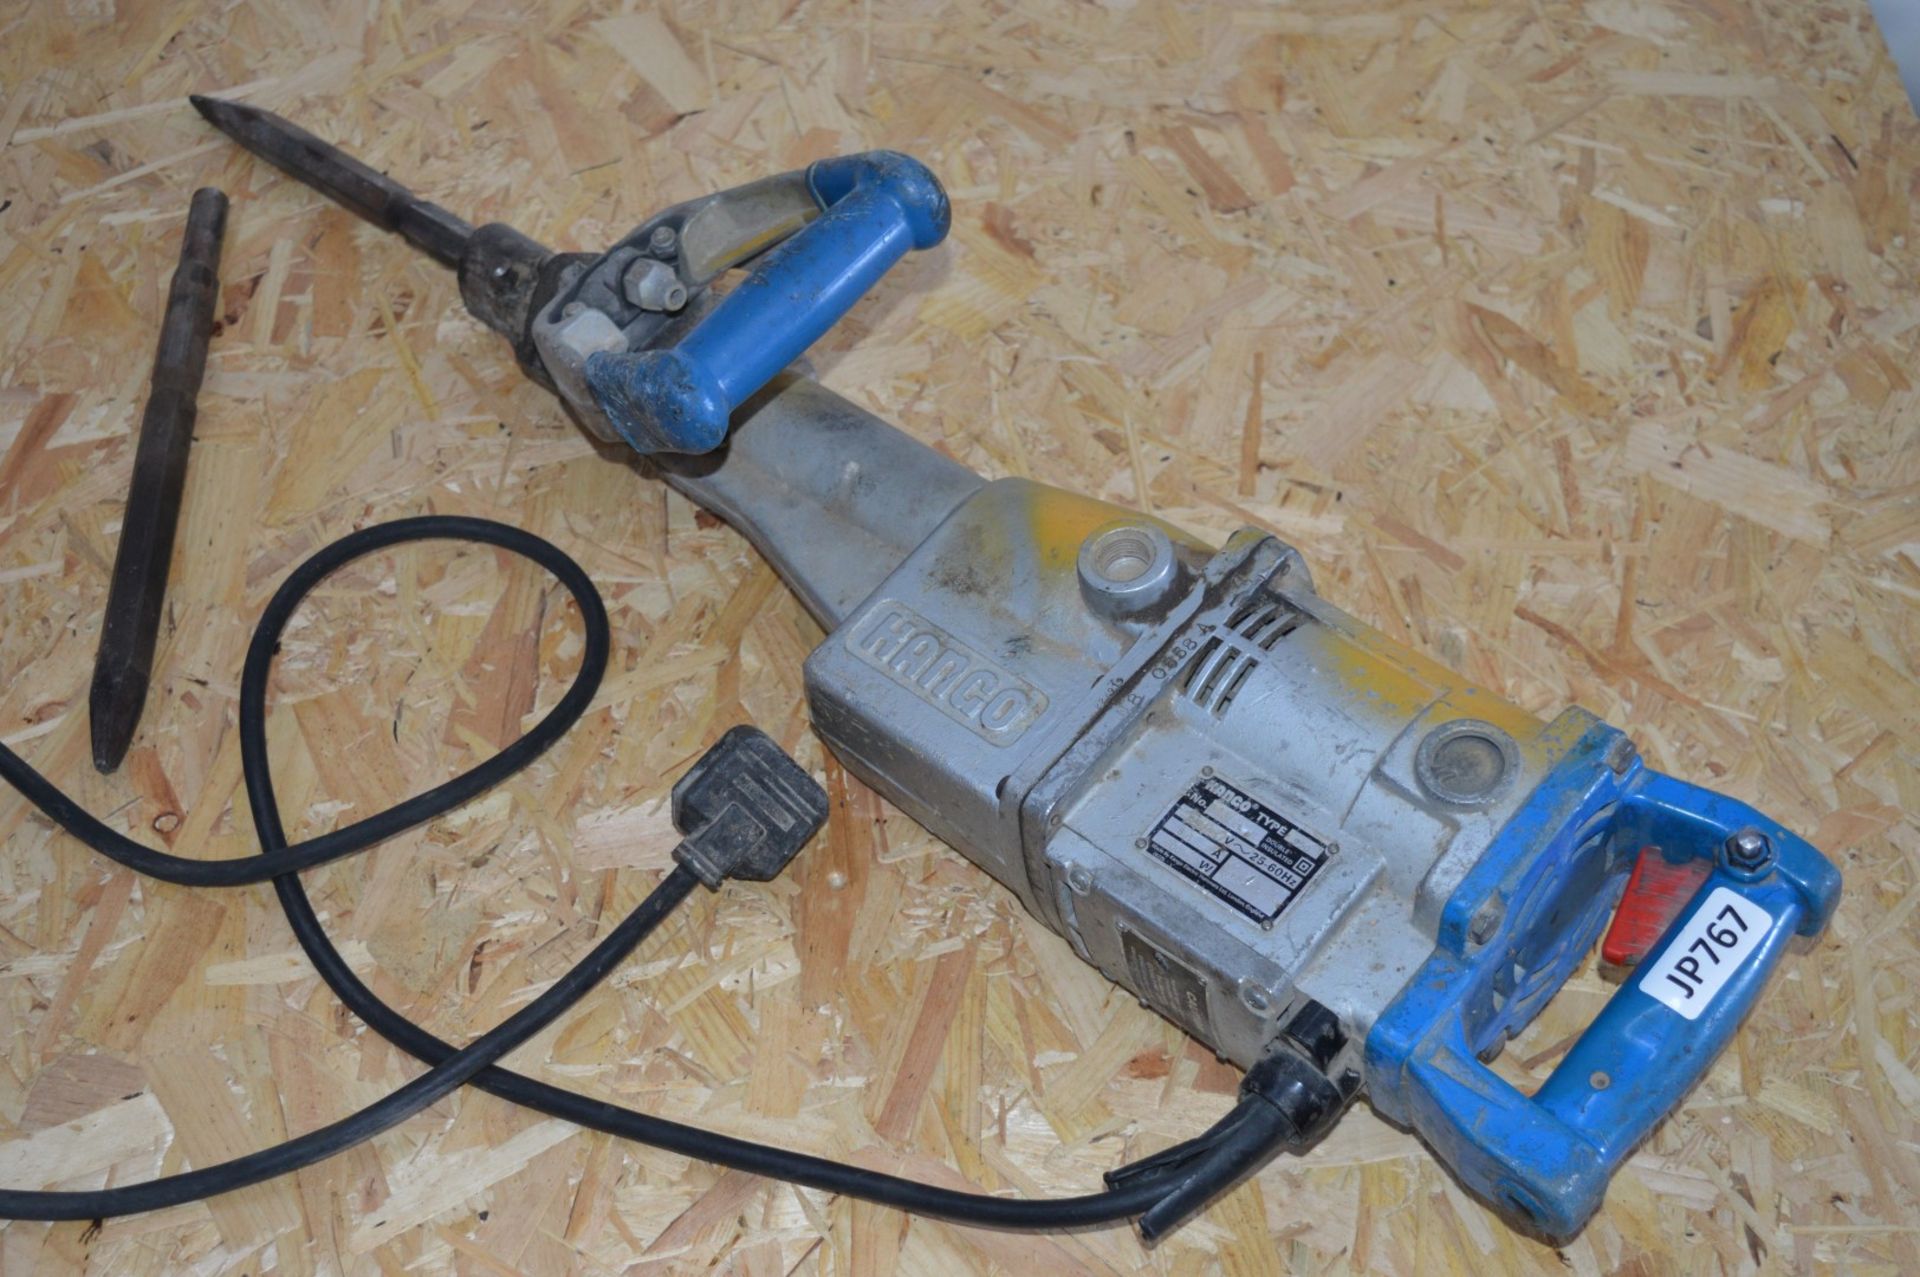 1 x Kango 950 Concrete Breaker / Hammer Drill With Two Drill Bits - 240v UK Plug - CL011 - Ref JP767 - Image 8 of 9